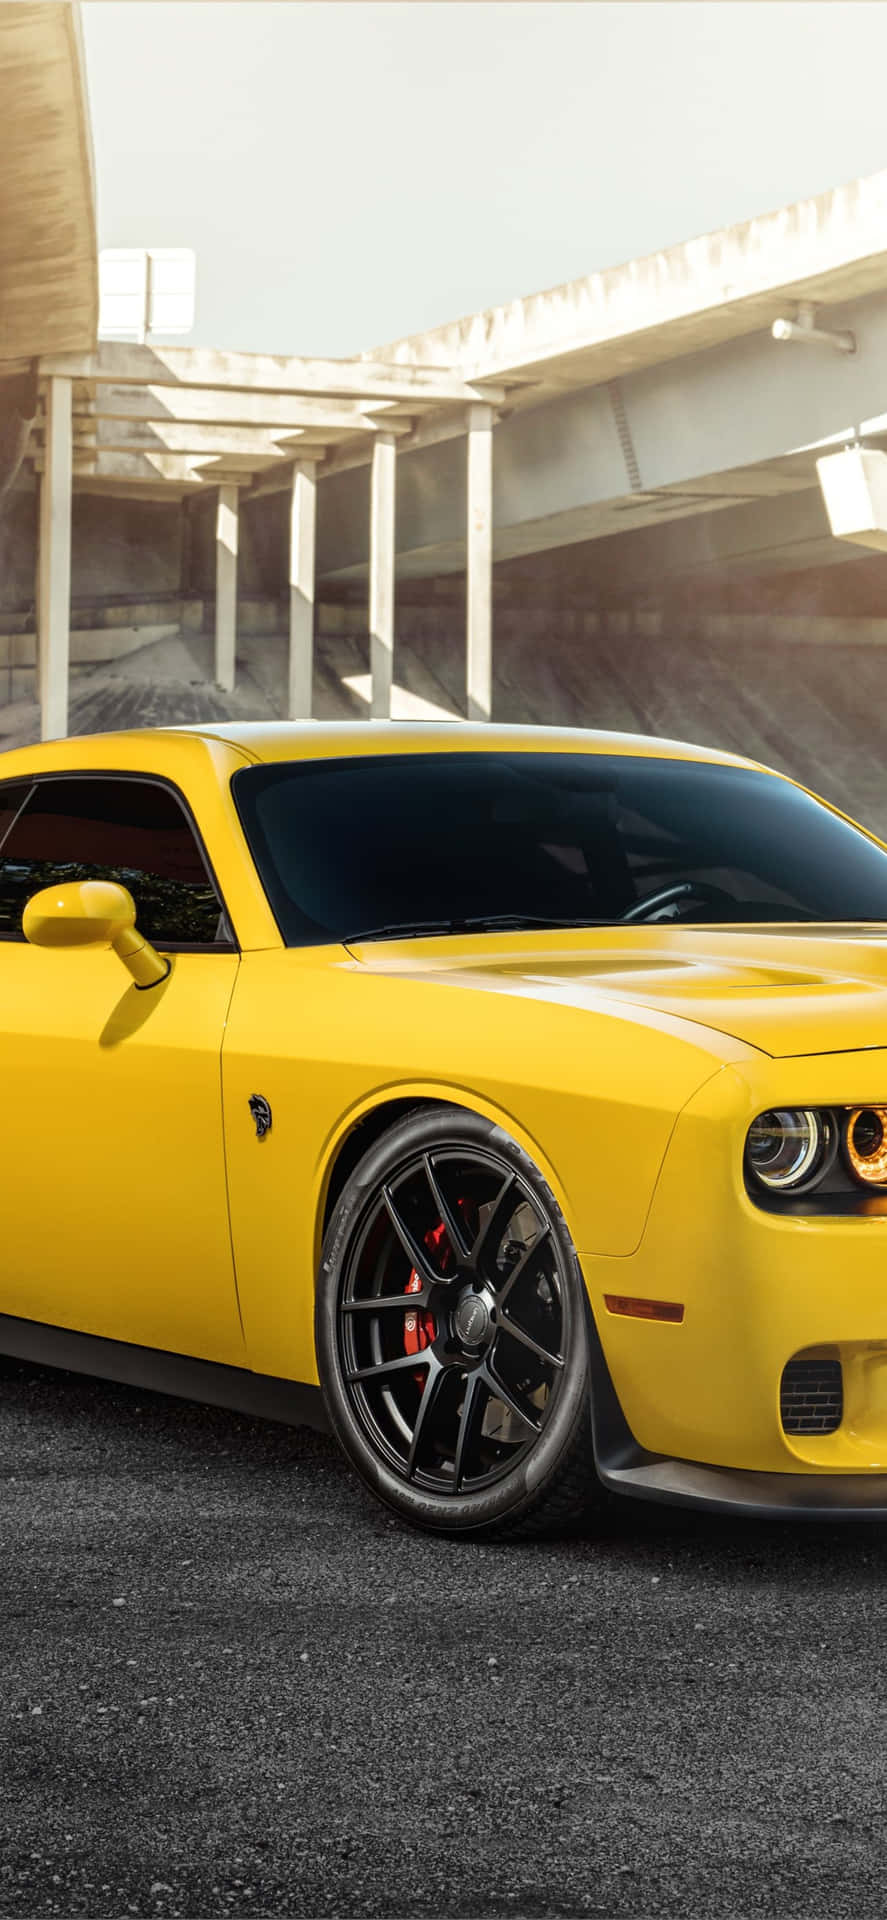 Take a Ride in Style with the Dodge Charger Wallpaper